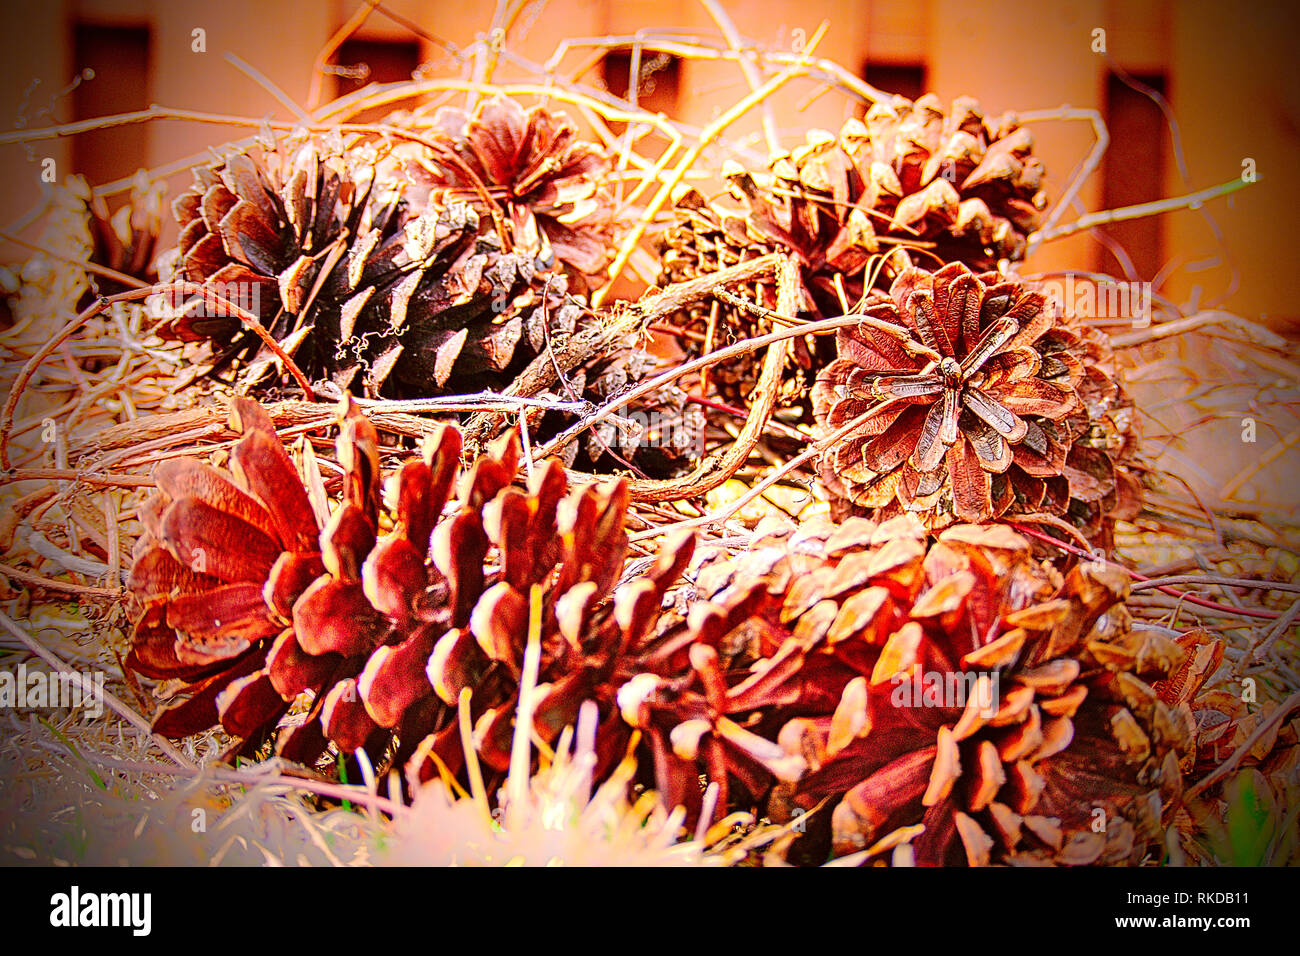 Close-up of several pinecones on the ground entangled in vines. Stock Photo